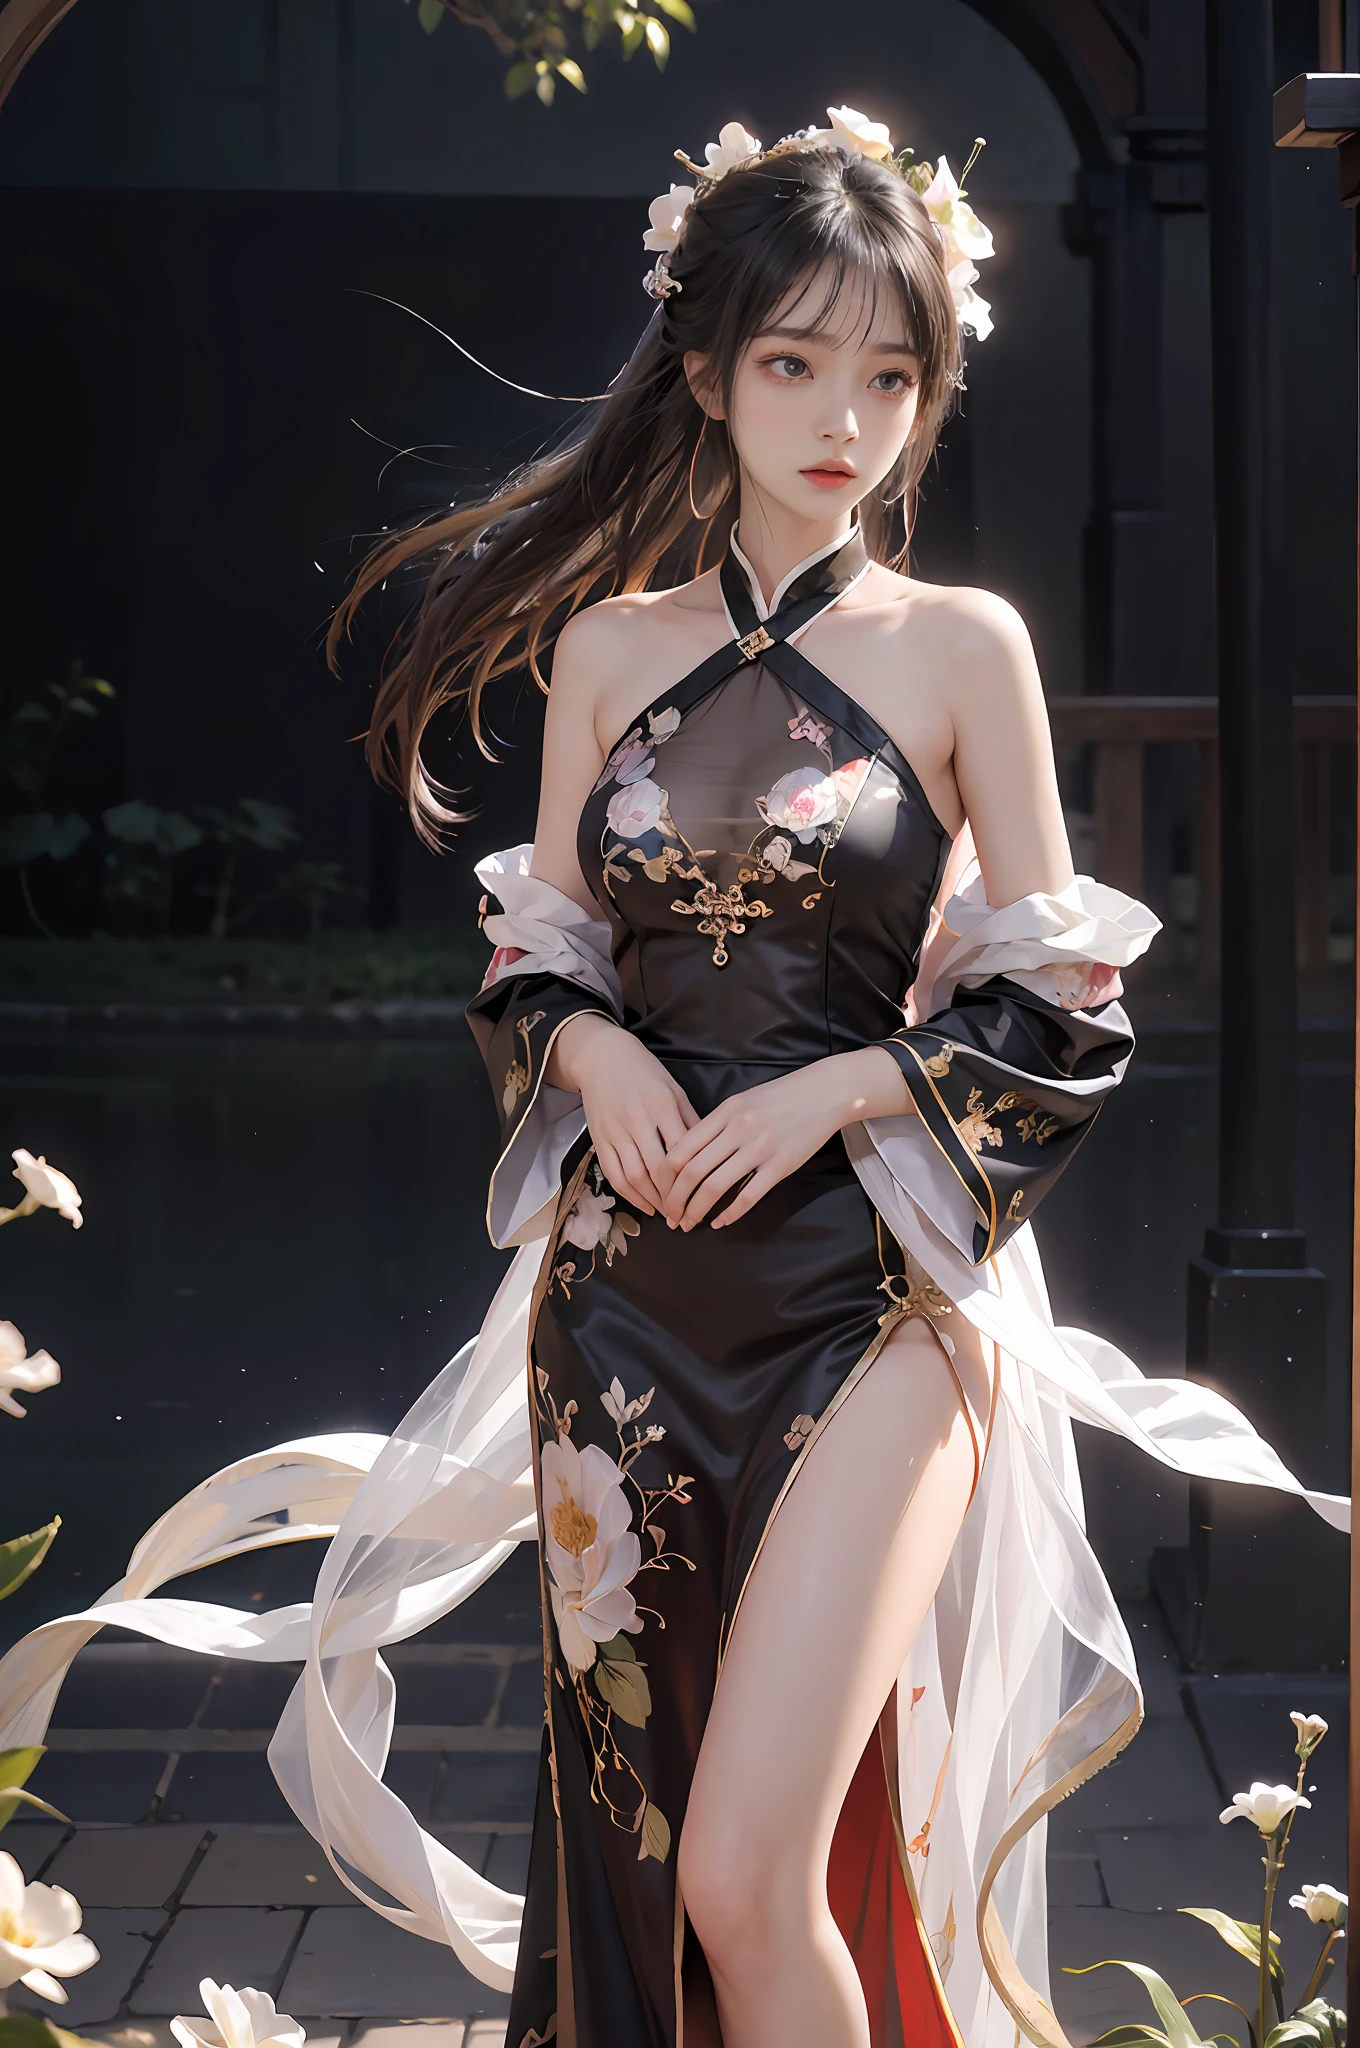 Zhong Fenghua， 1girll， （full bodyesbian） solo， Hanfu， flower  field， blossom flower， （Black smoke：1.4） （realisticlying：1.5）， datura， entangled， offcial art， Unity 8k Wallpaper， ultra - detailed， Beautiful and beautiful， tmasterpiece，best qualtiy， （dynamic angle：1.4）， （Realistic：1.5），（Real human photos；1.5），（Bigboobs：1.2），（Liuhai hairstyle：1.5）（Shoulders exposed：1.2），Glowing skin， （Floating colorful flashes：1.2），The most beautiful classical form，（ellegance：1.2），Fauvistdesign，vivd colour，Romanticism Depth of Field，